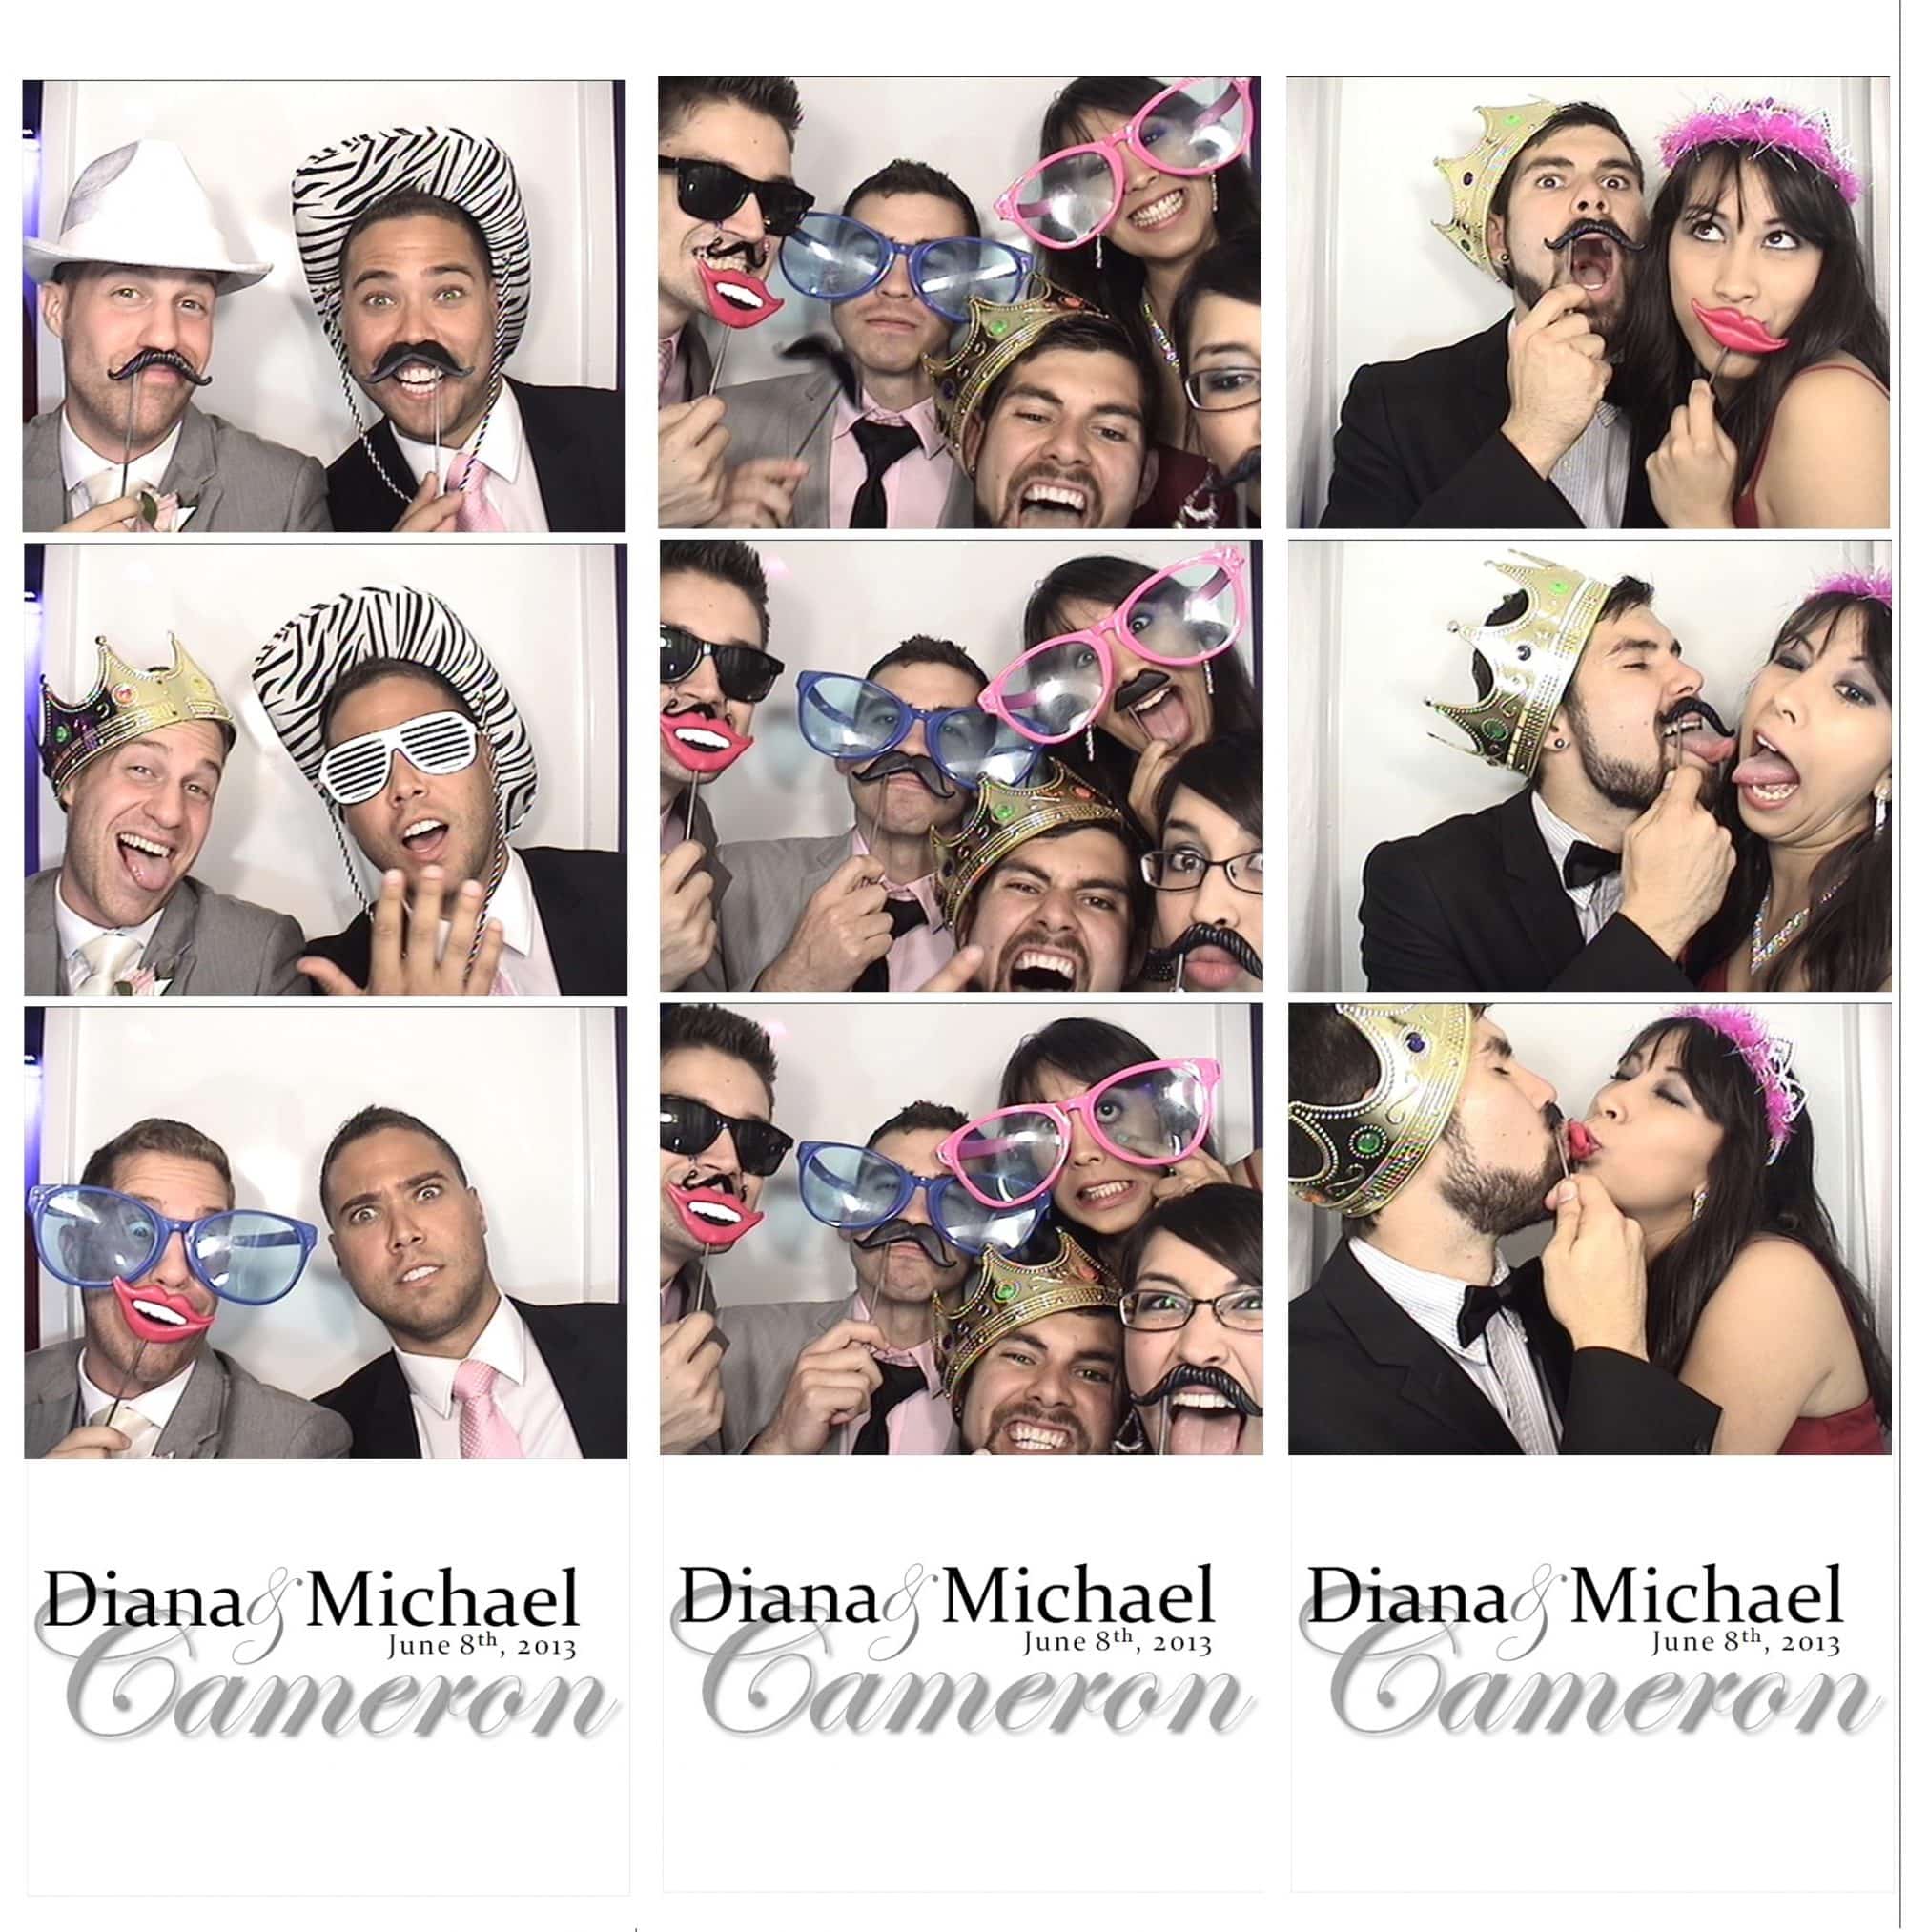 diana + michael wedding at heaven event center playing in photobooth